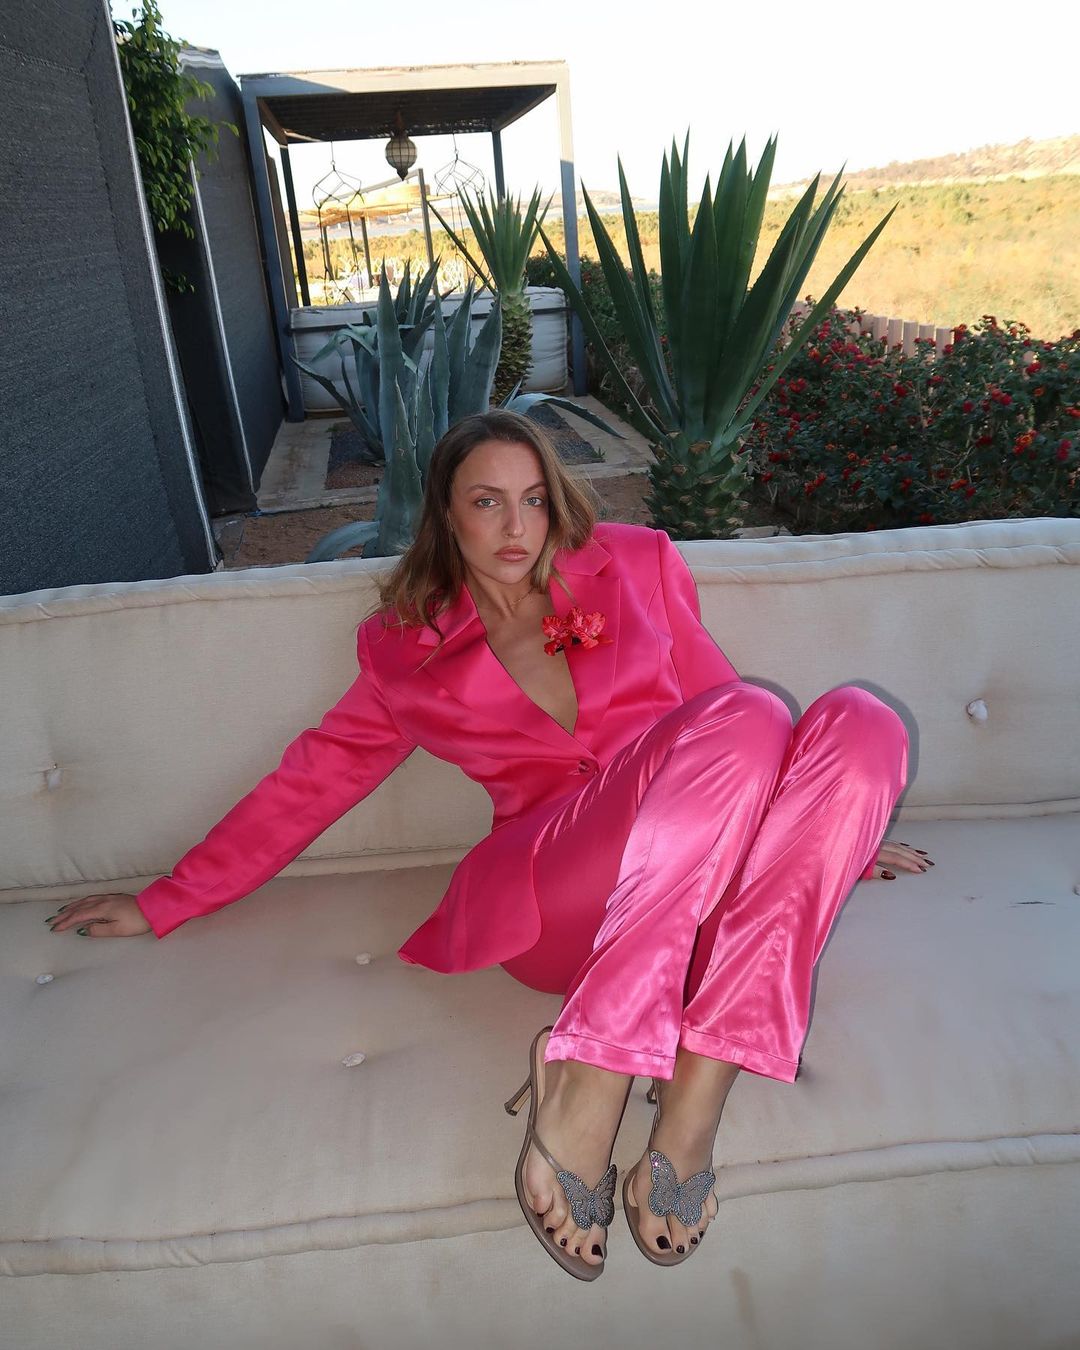 Date Night Is Made Even Better With A Pink Power Suit